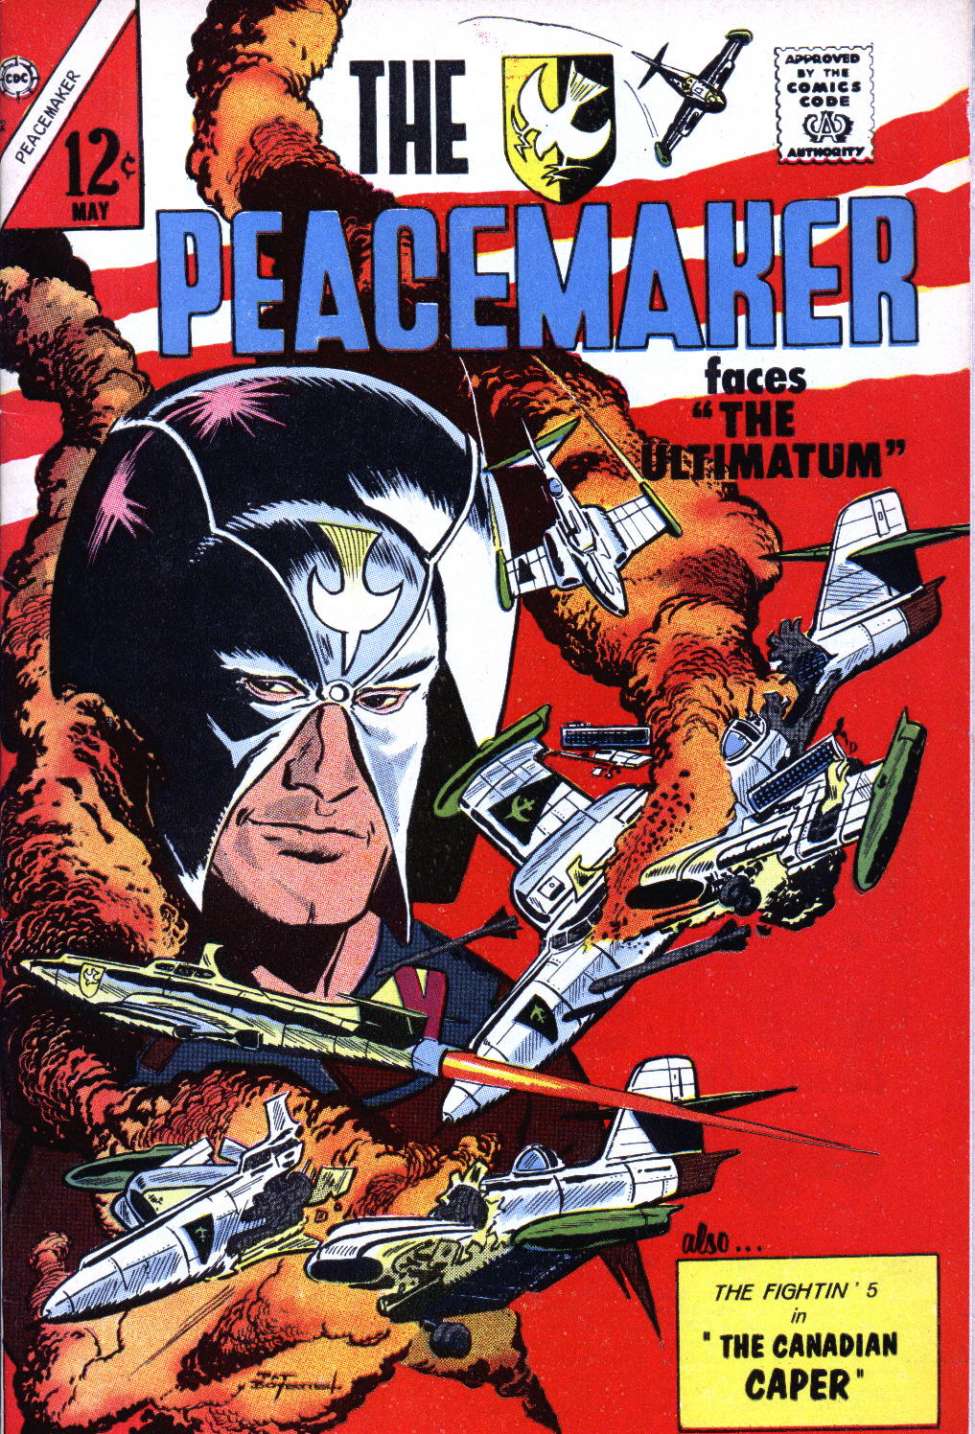 Book Cover For Peacemaker 2 - Version 2